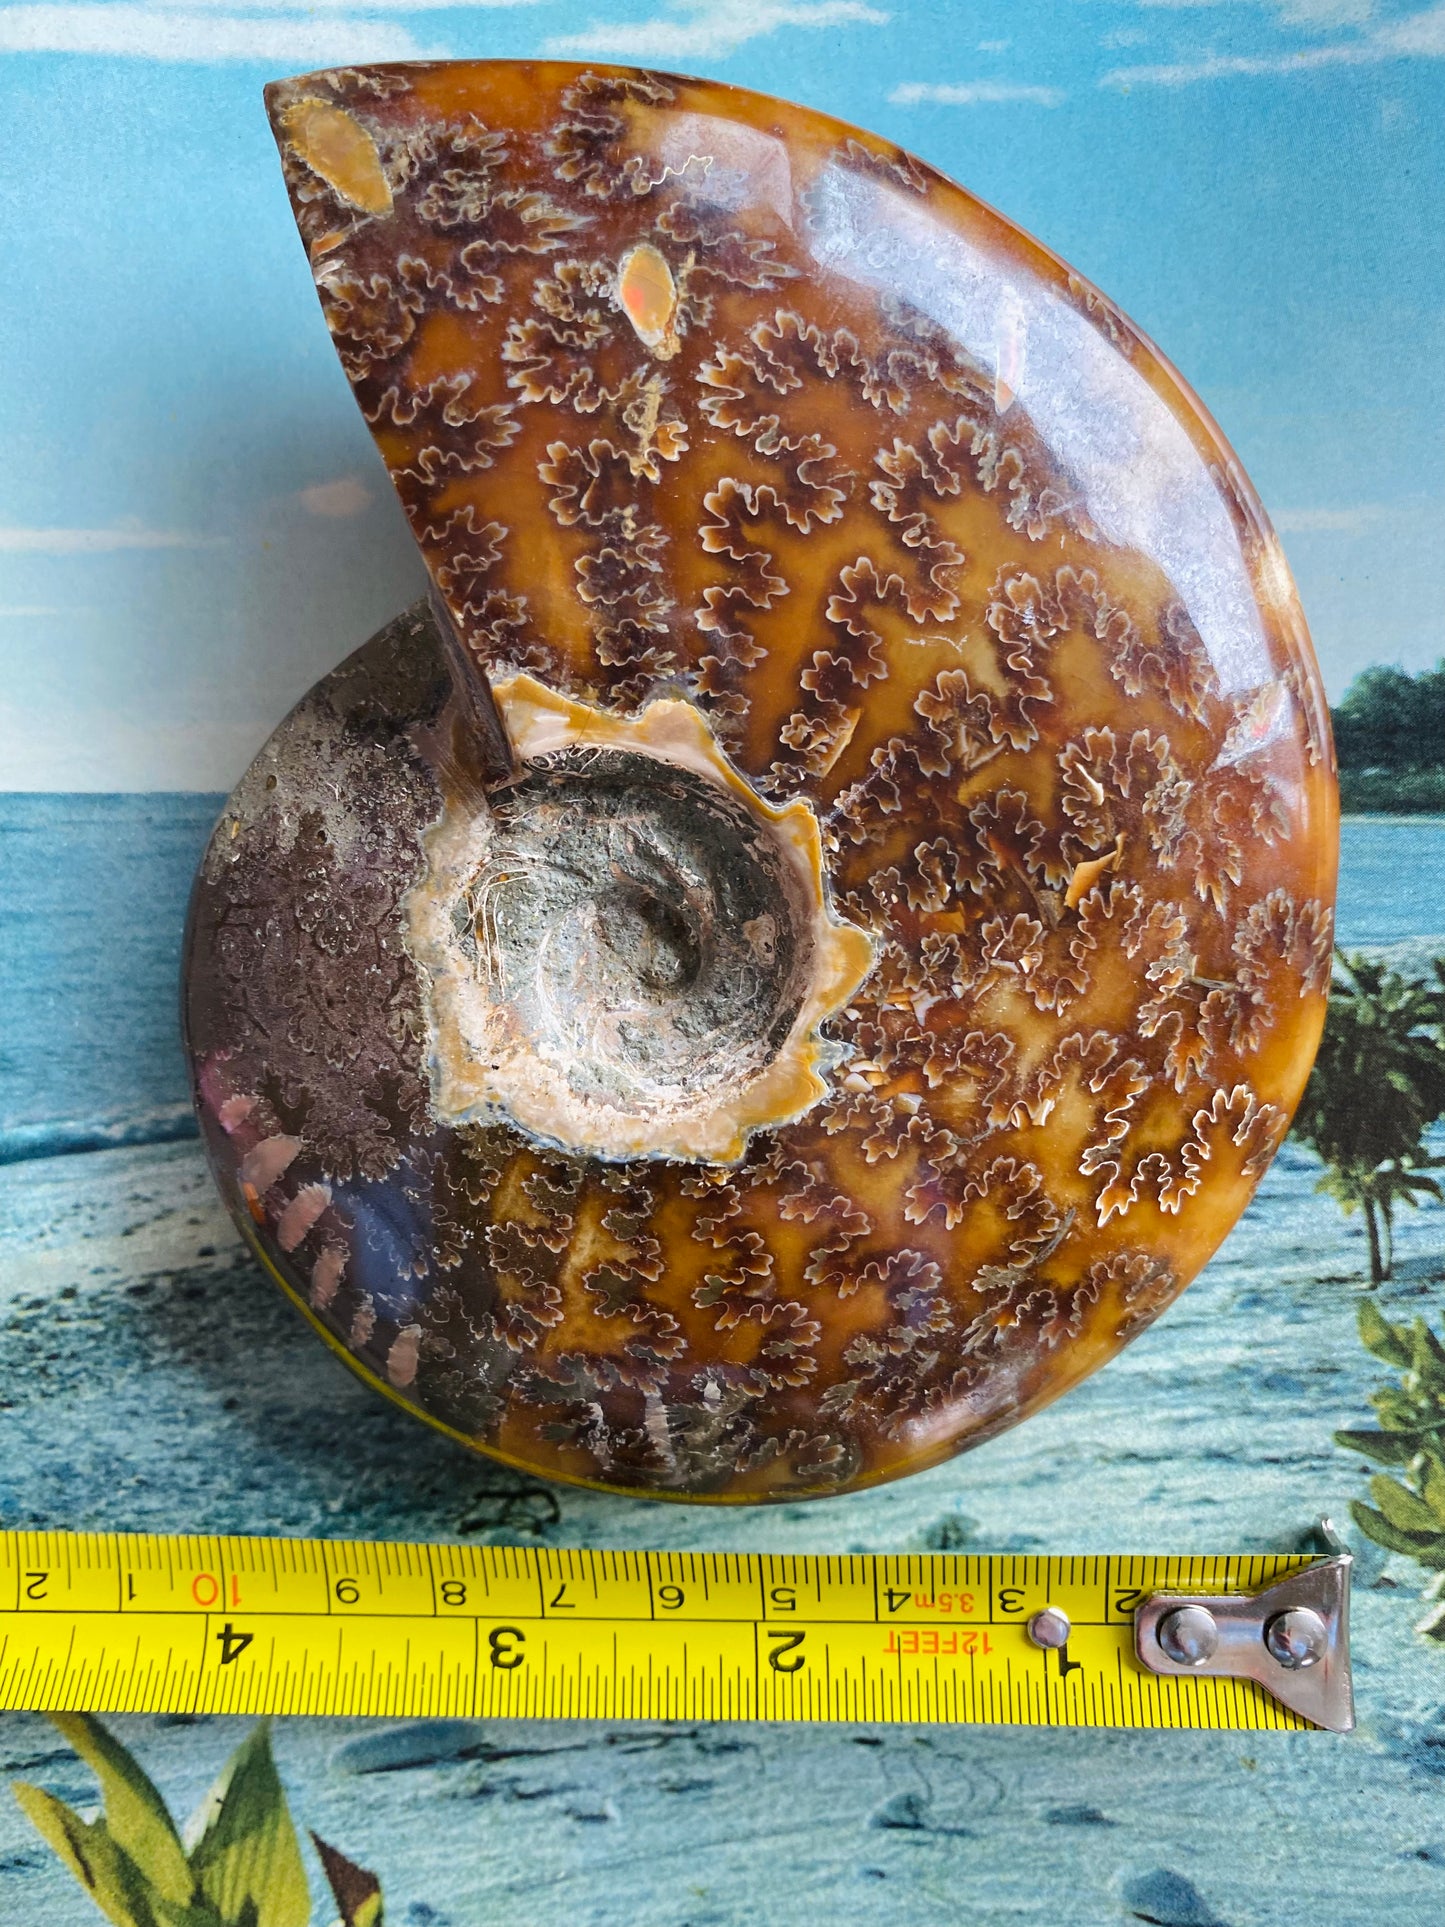 Polished Ammonite Fossil 5"x4" - Moon Room Shop and Wellness